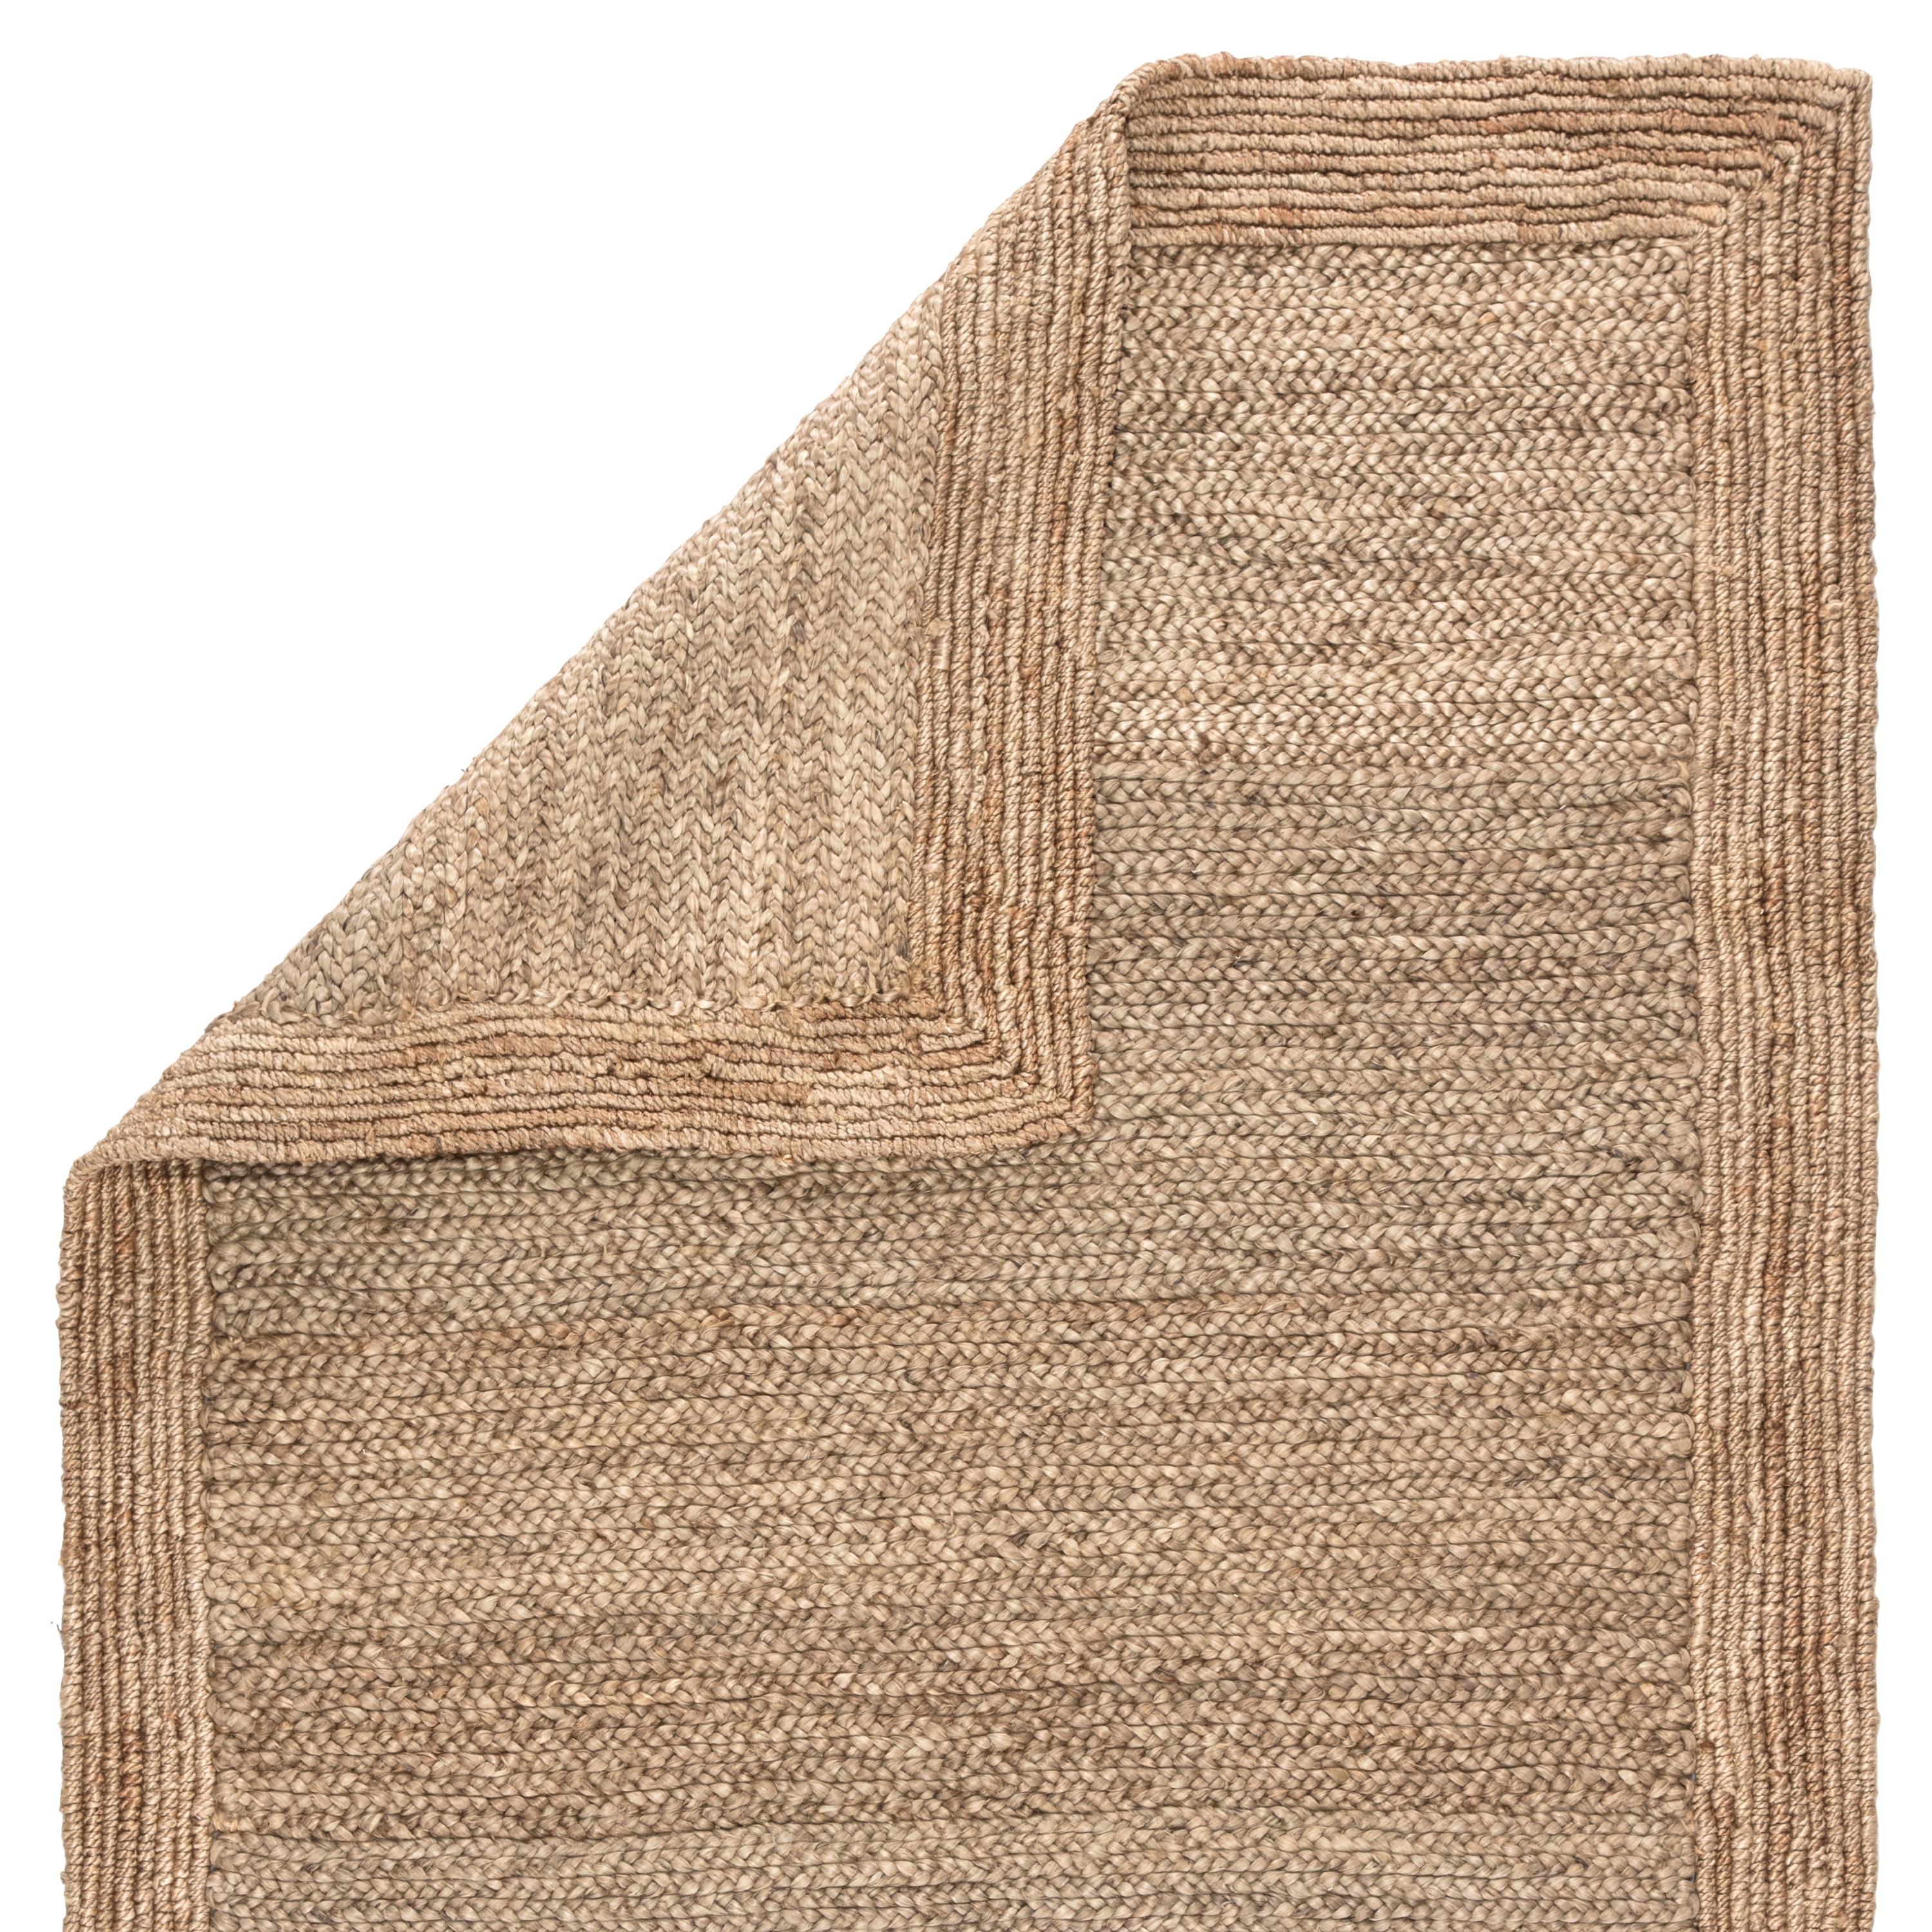 Aboo Natural Solid Beige Area Rug (9' X 12') - Image 2